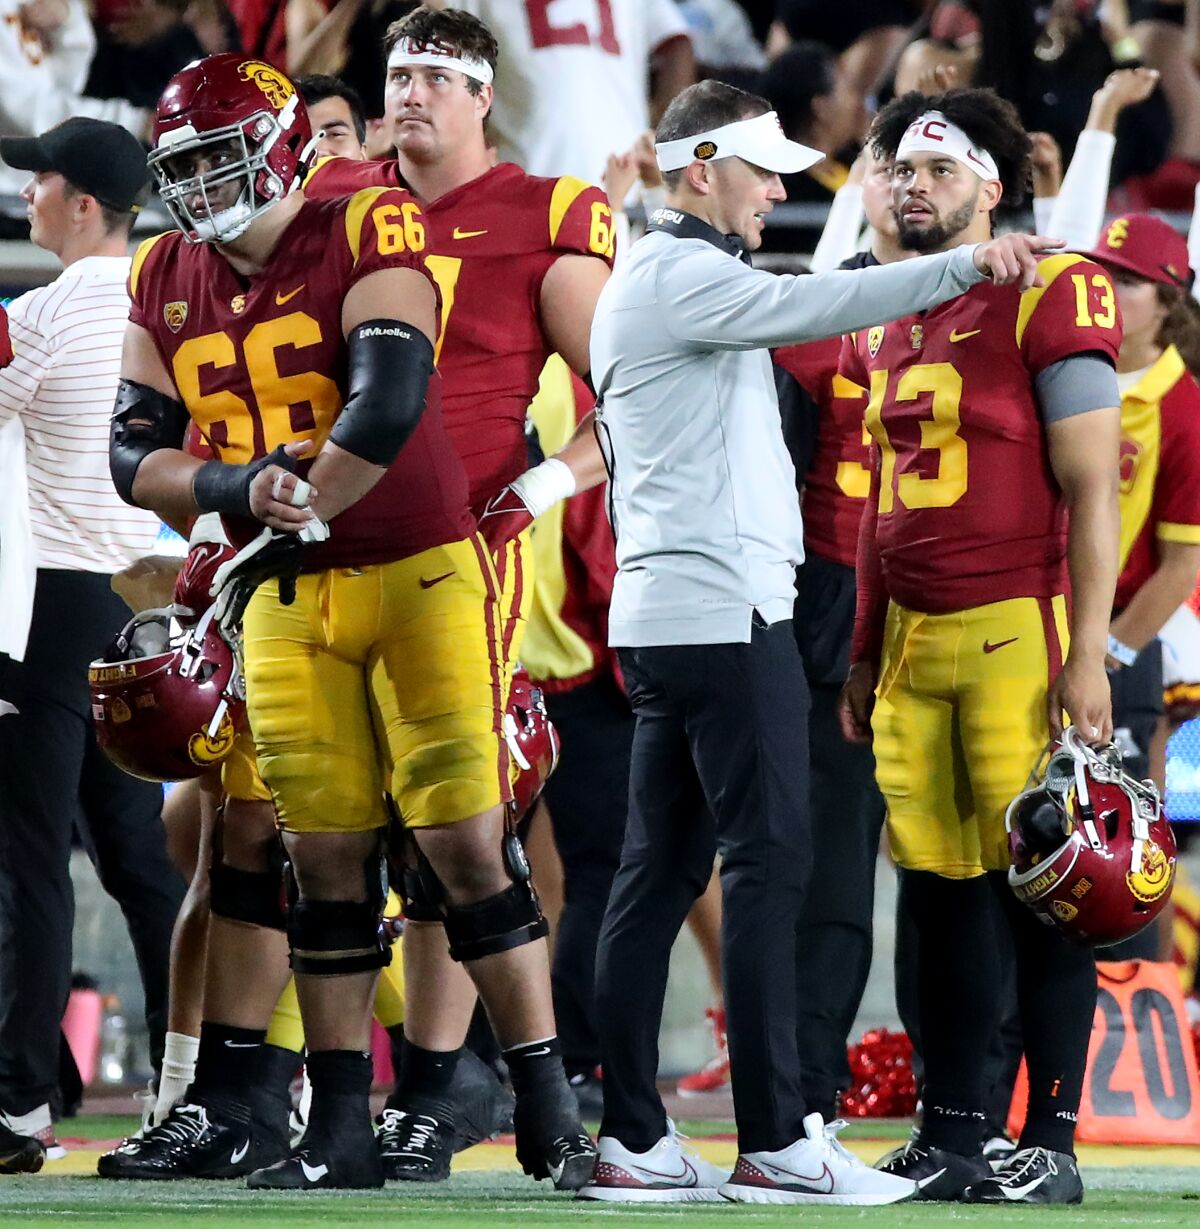 USC coach Lincoln Riley gestures while speaking to quarterback Caleb Williams on the touchline